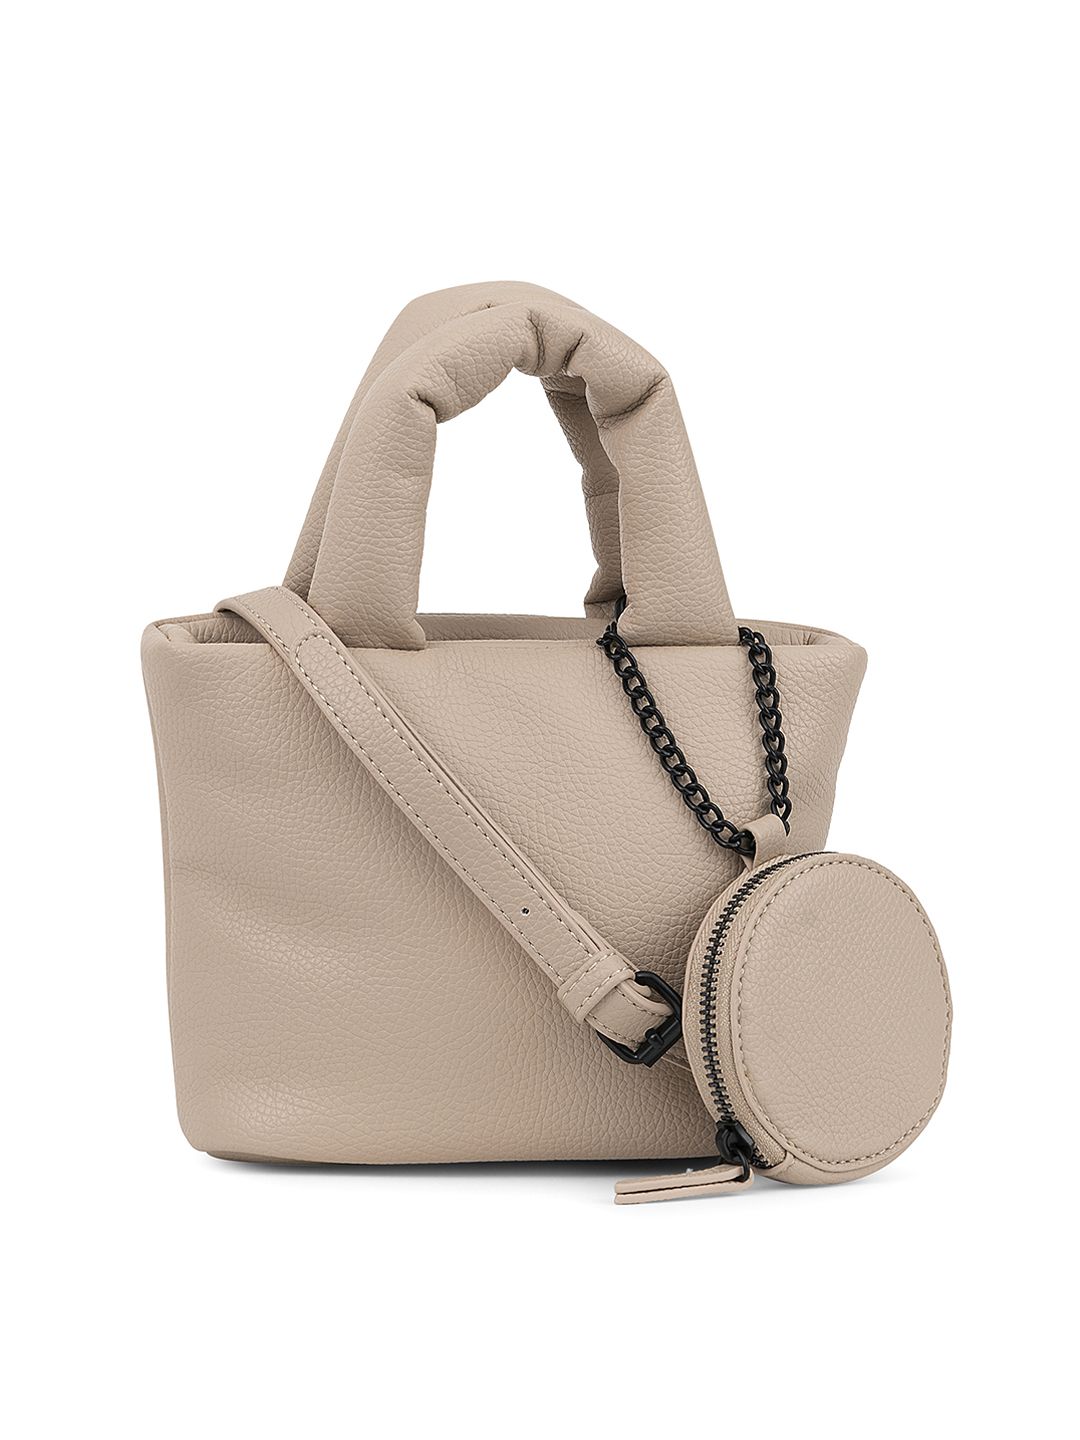 MIRAGGIO Nude-Coloured PU Structured Small Tote Bag with Pouch Price in India